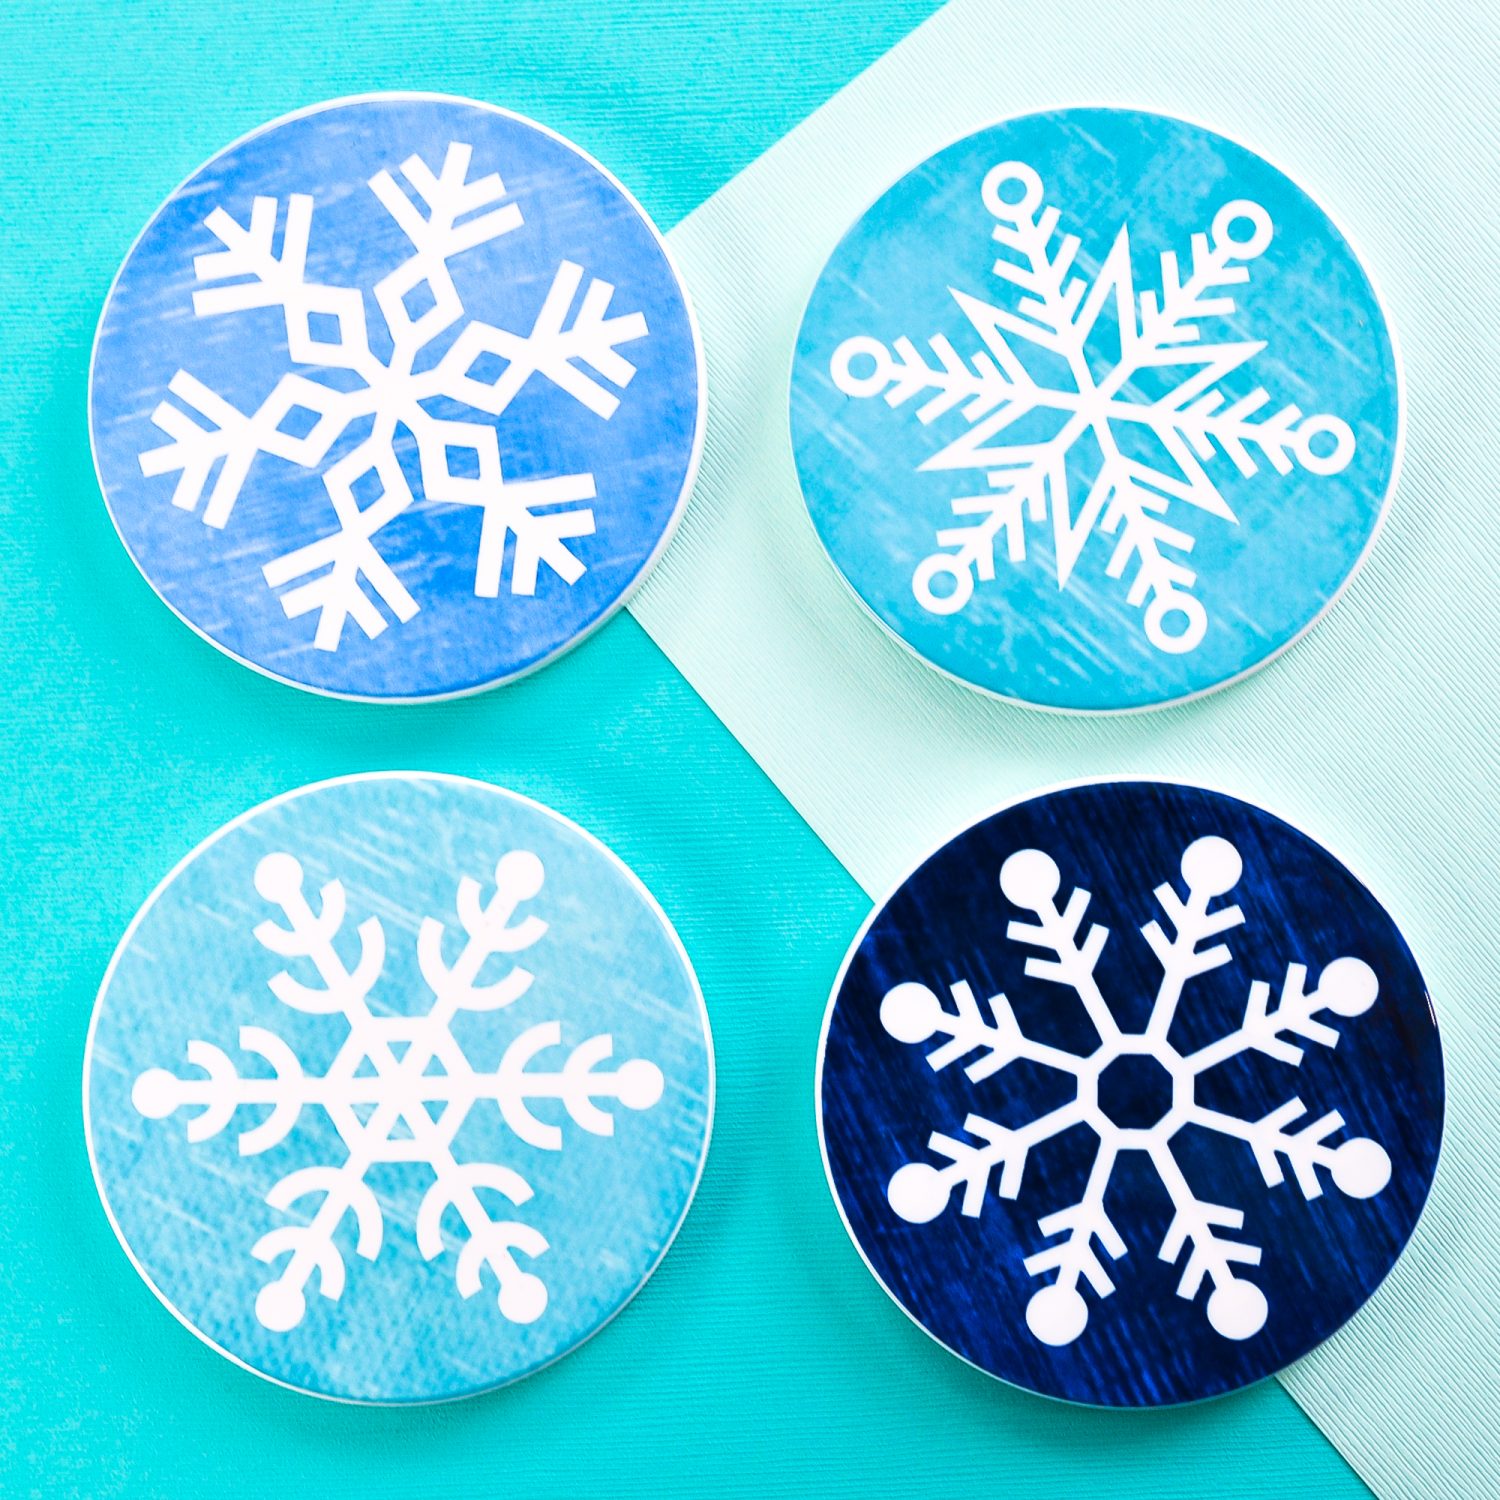 Four finished snowflake coasters on teal background